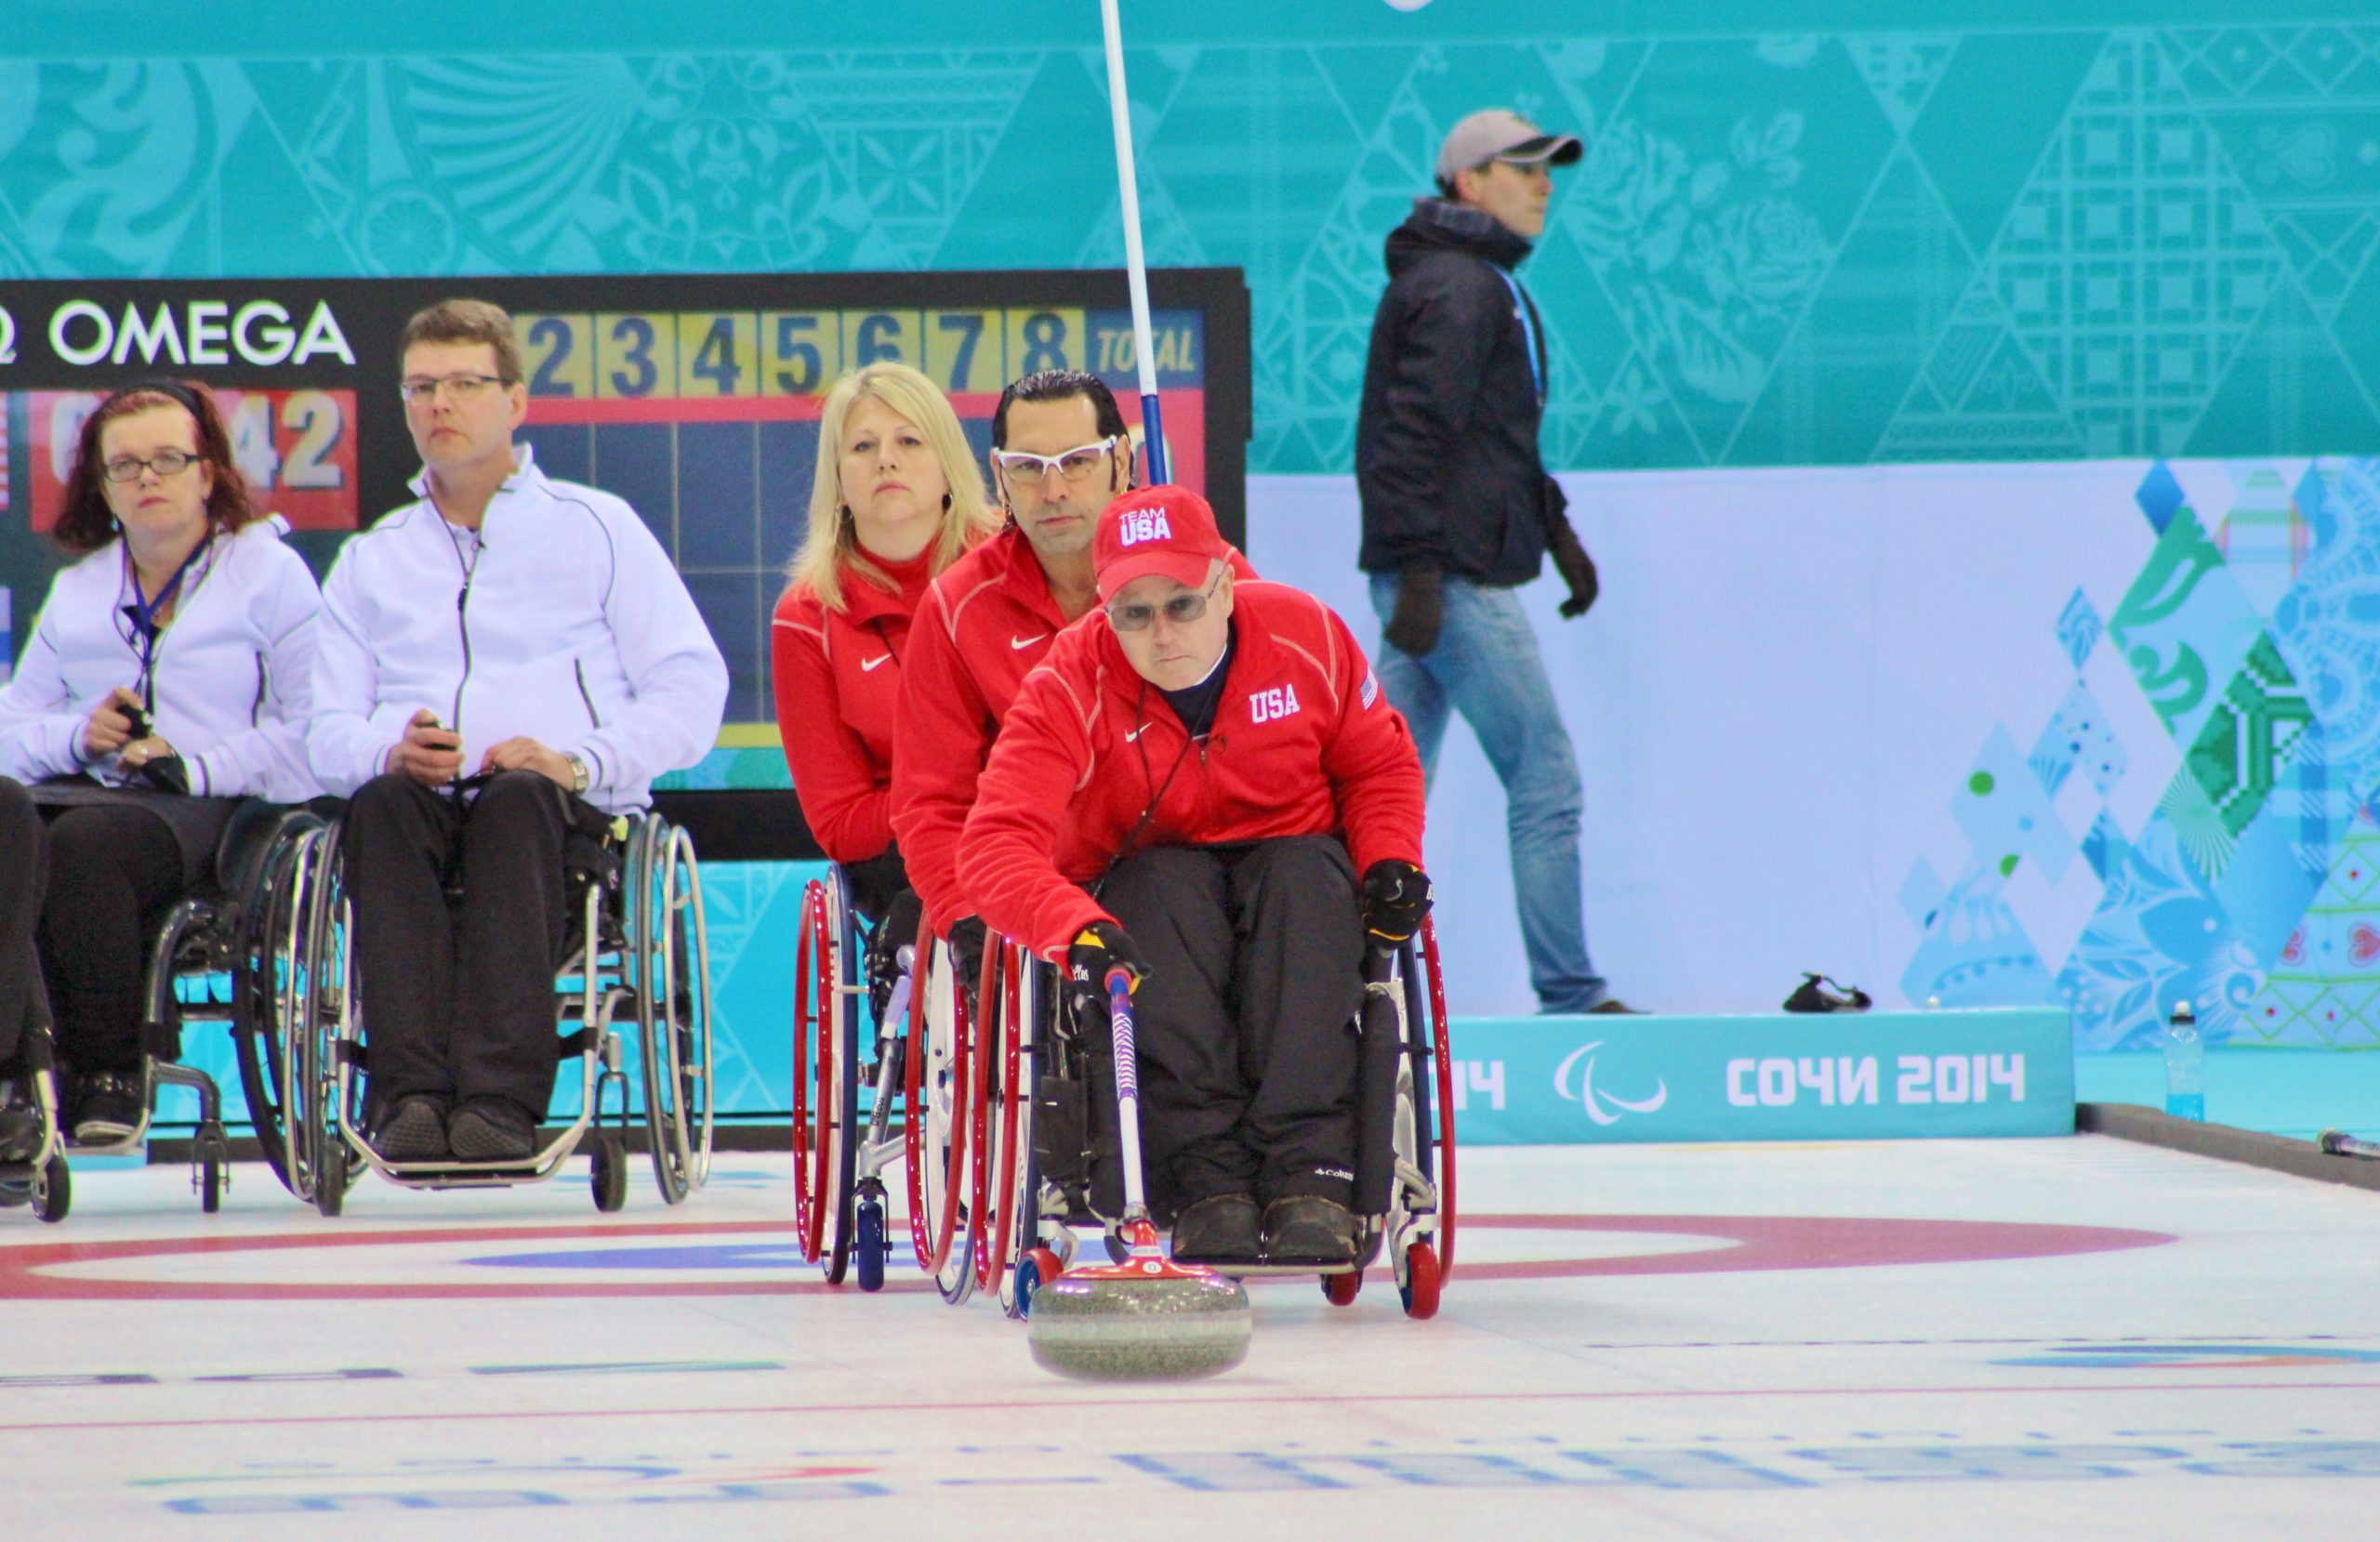 Group of athletes in wheelchairs watching another athlete curl